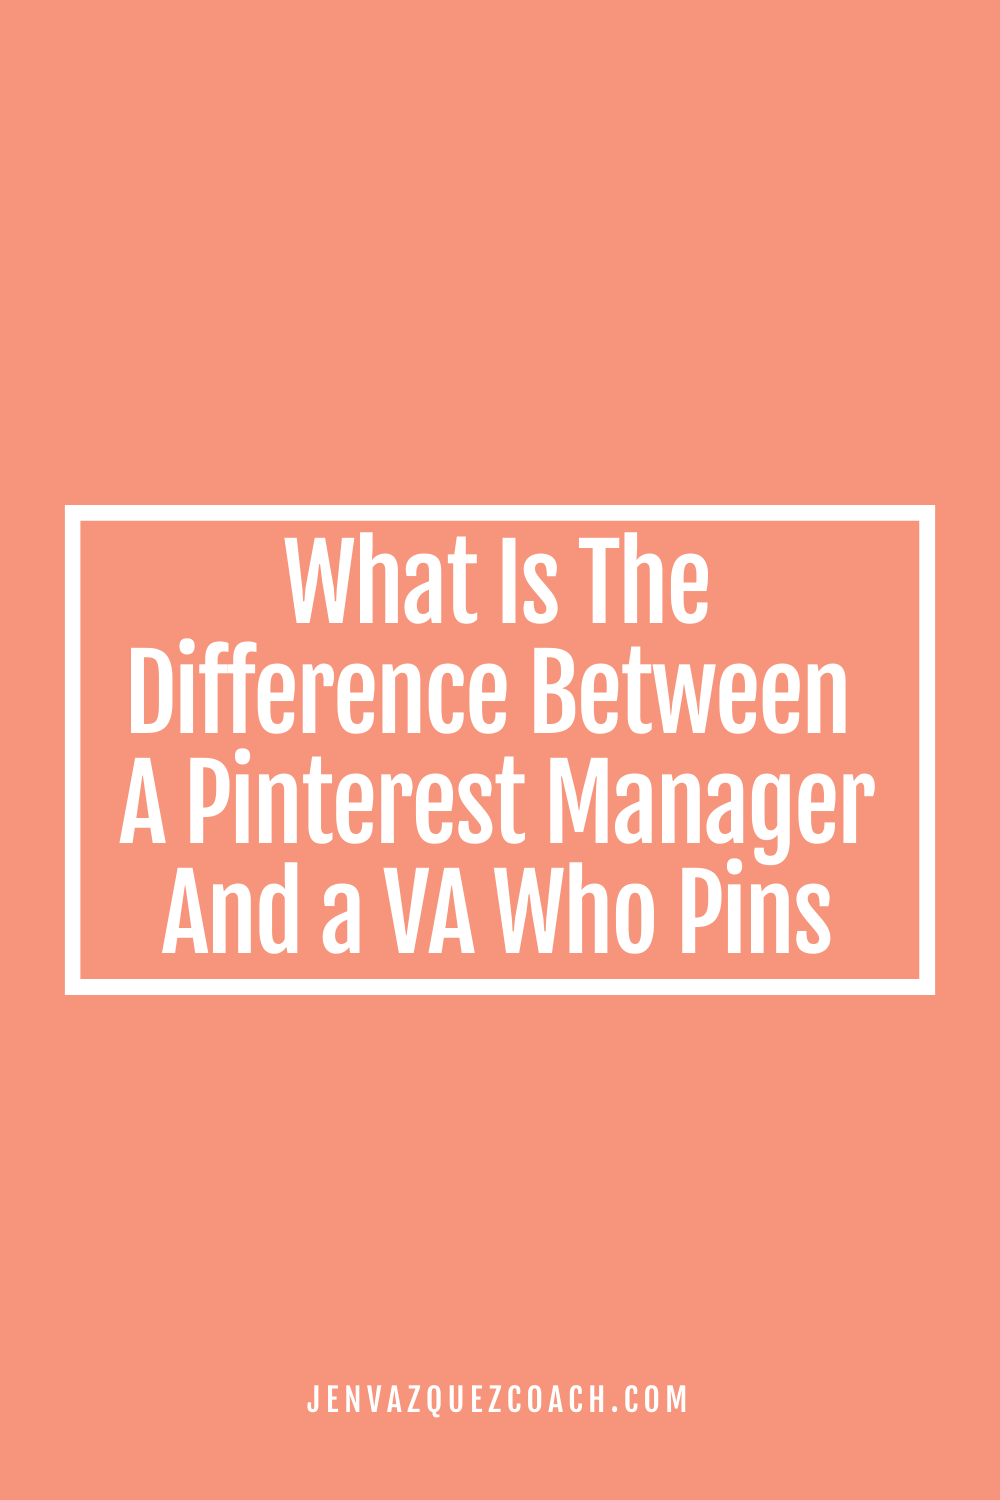 What Is The Difference Between A Pinterest Manager And a VA Who Pins, Jen  Vazquez Media